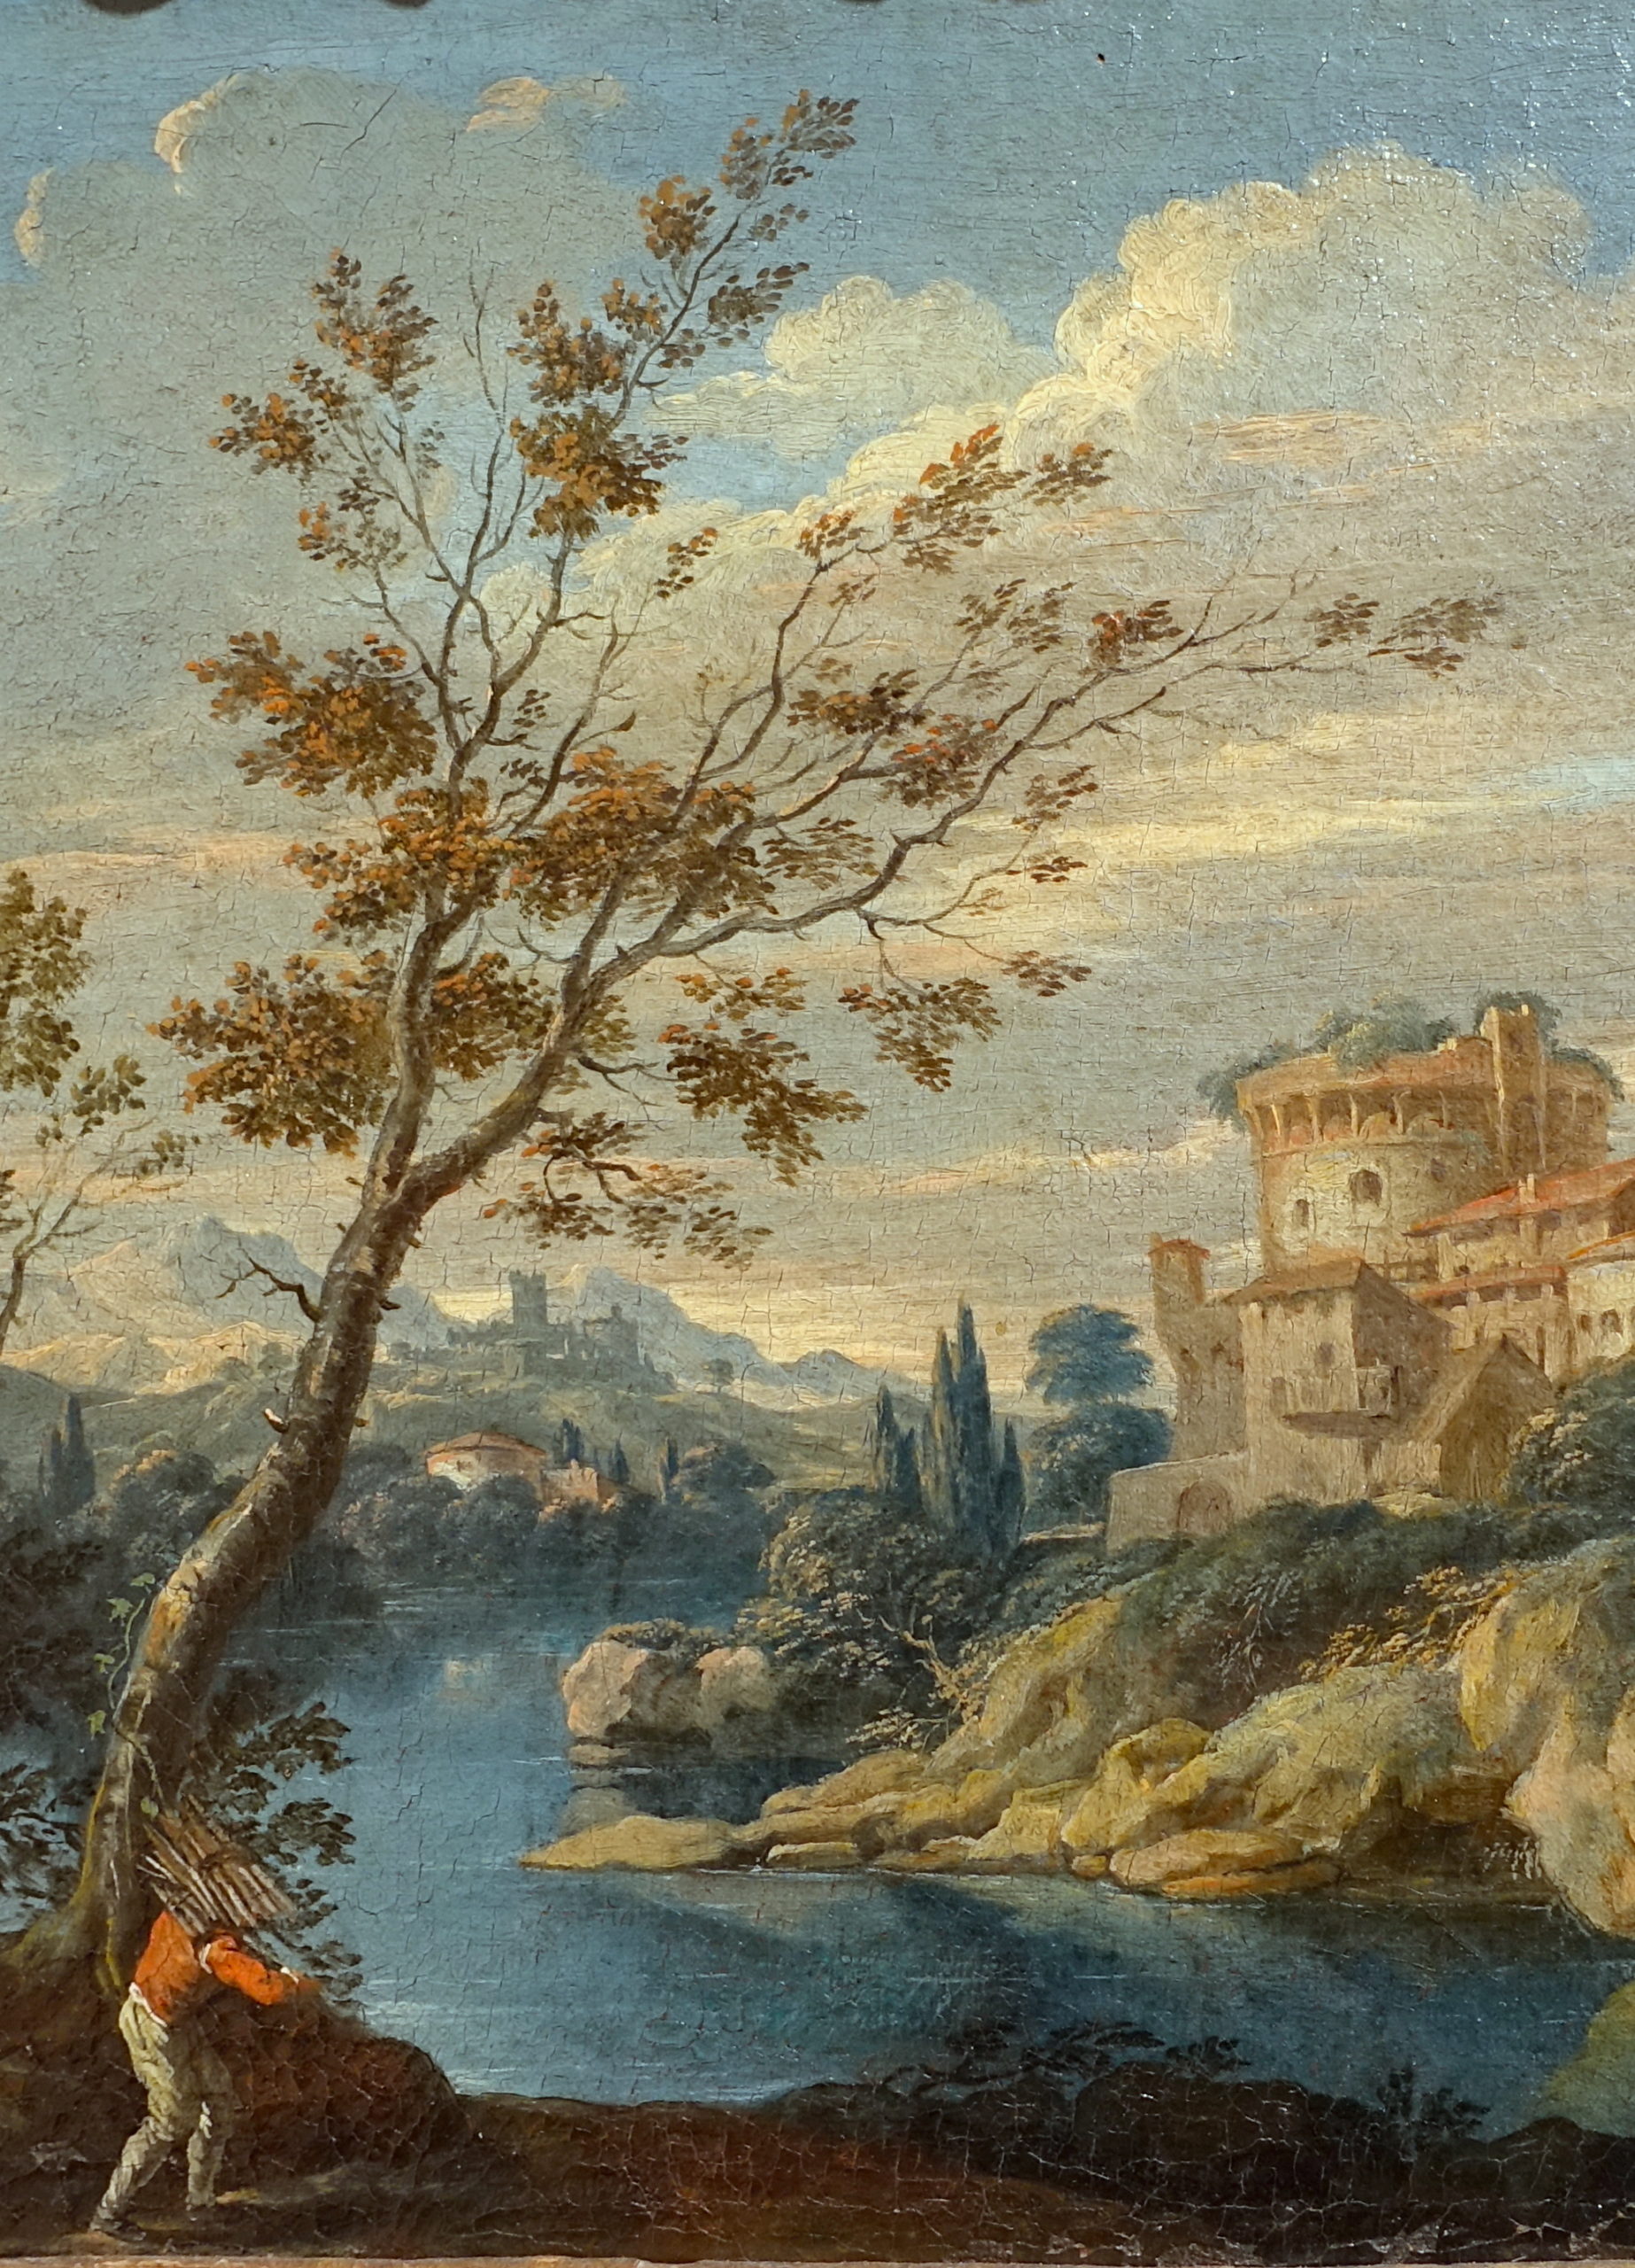 art masterpieces - A_River_Landscape_with_a_Figure,_by_Marco_Ricci,_1710s,_oil_on_canvas_-_Blanton_Museum_of_Art_-_Austin,_Texas